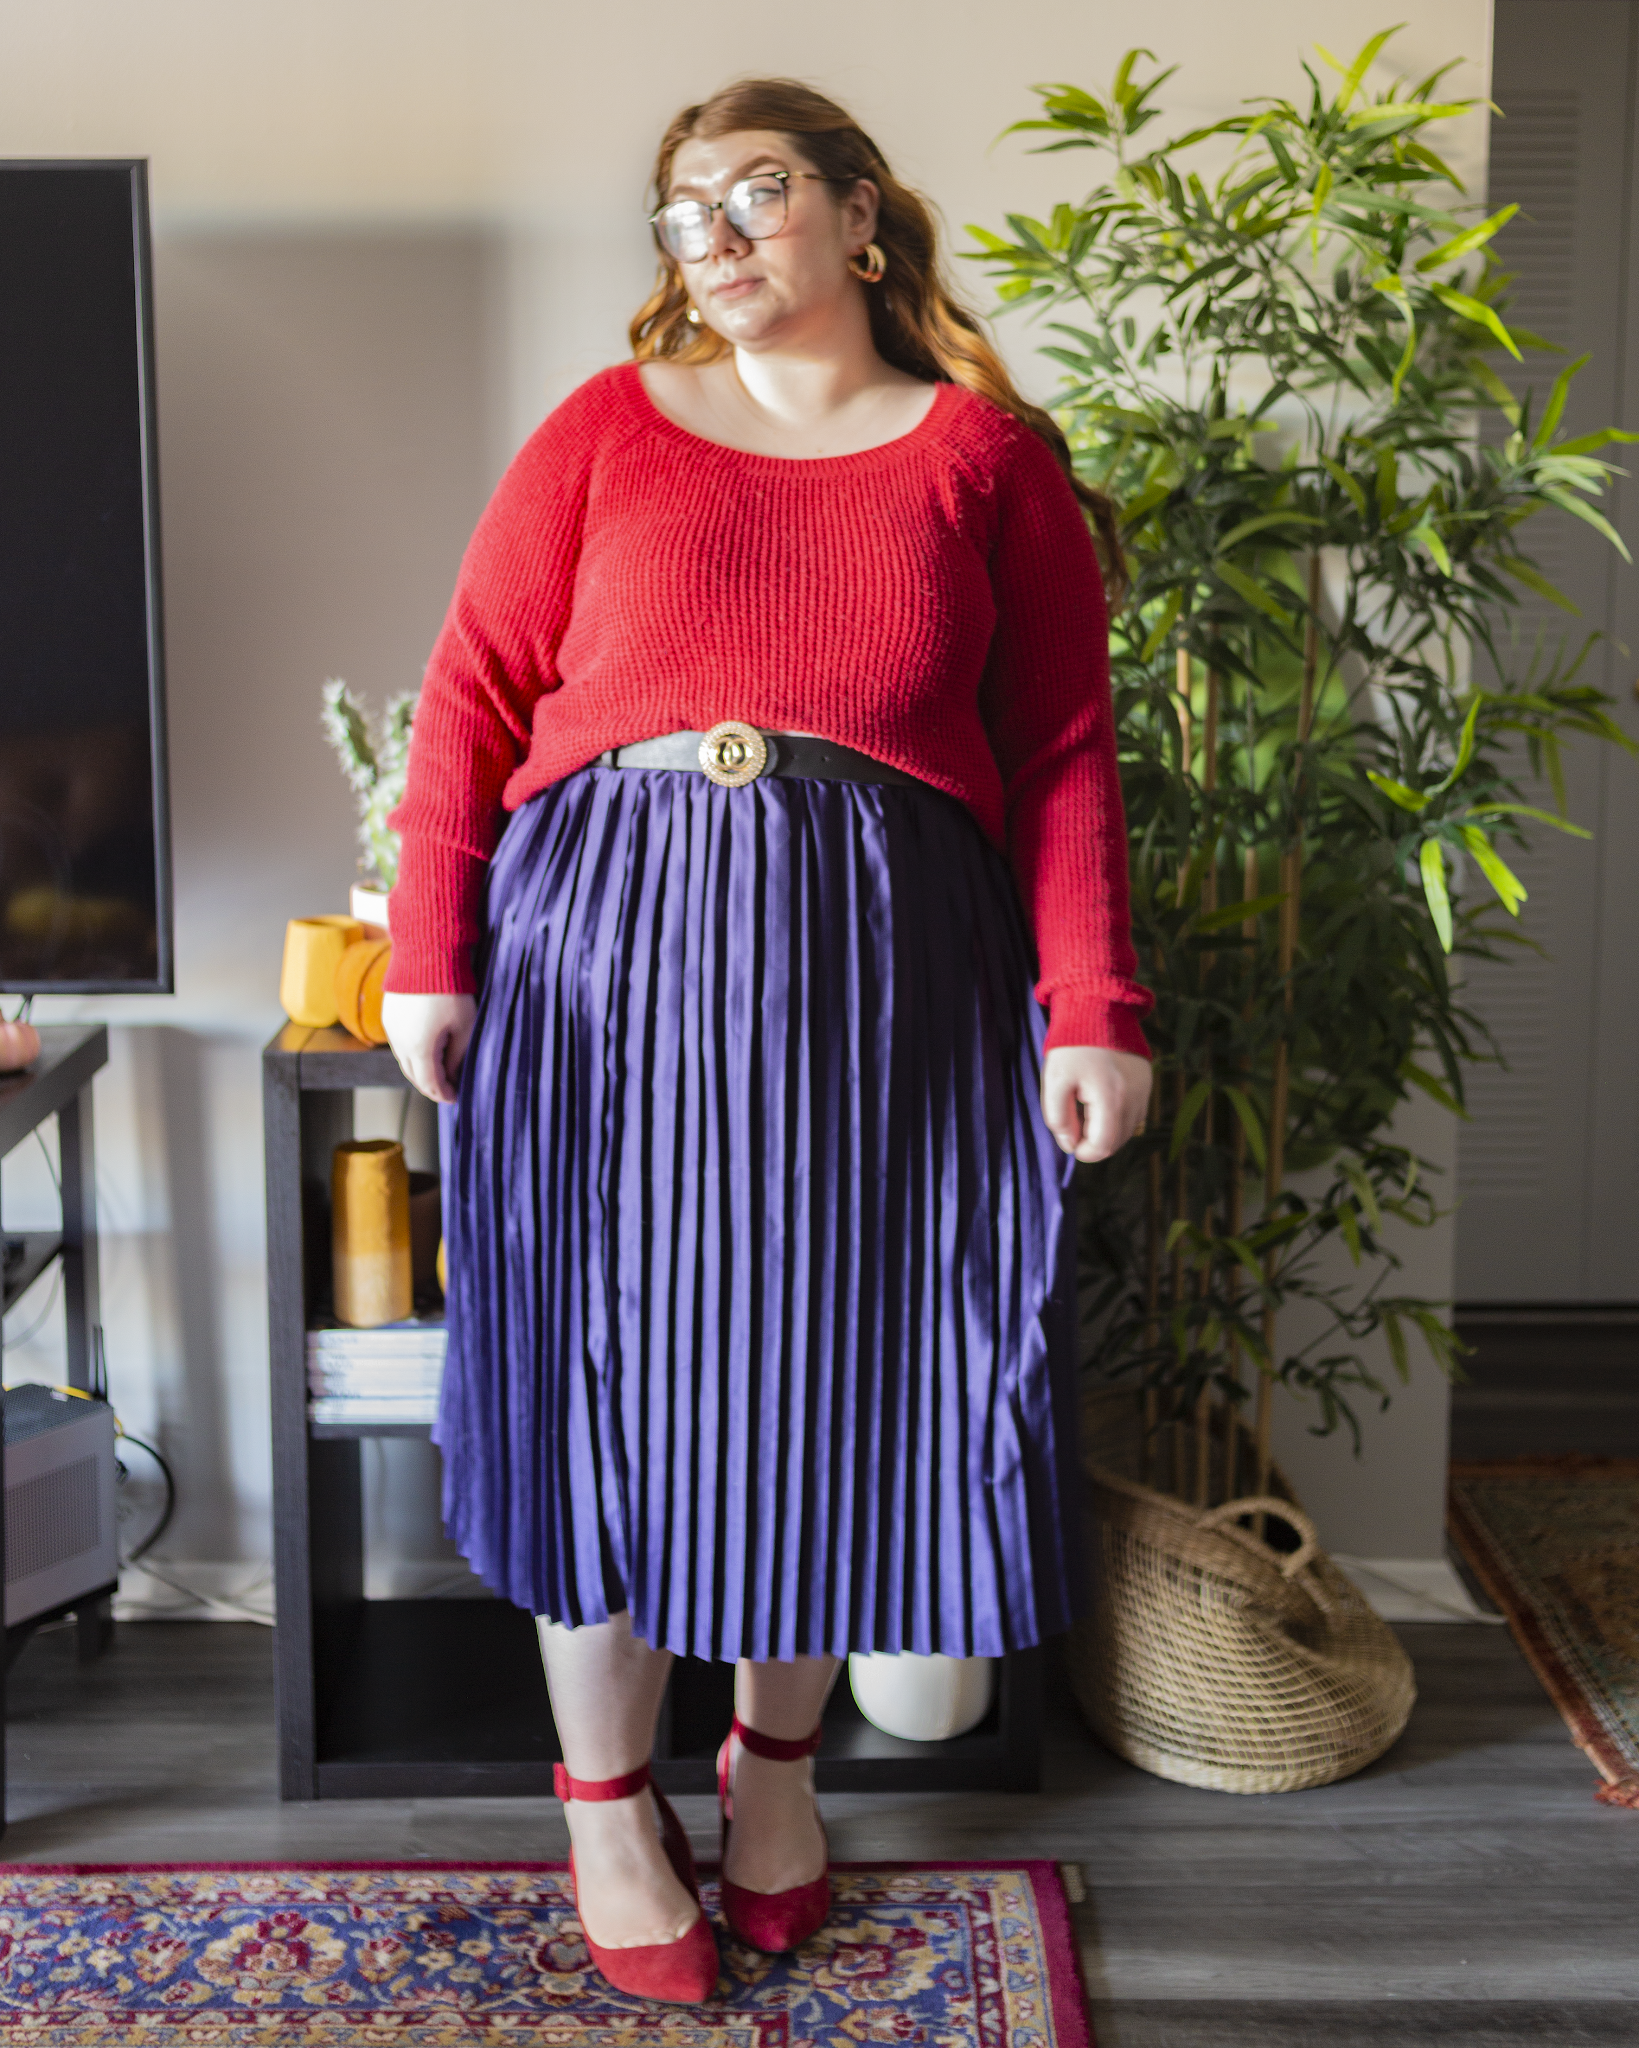 An outfit consisting of a red knit sweater half tucked into a navy blue satin pleated midi skirt and red heels.